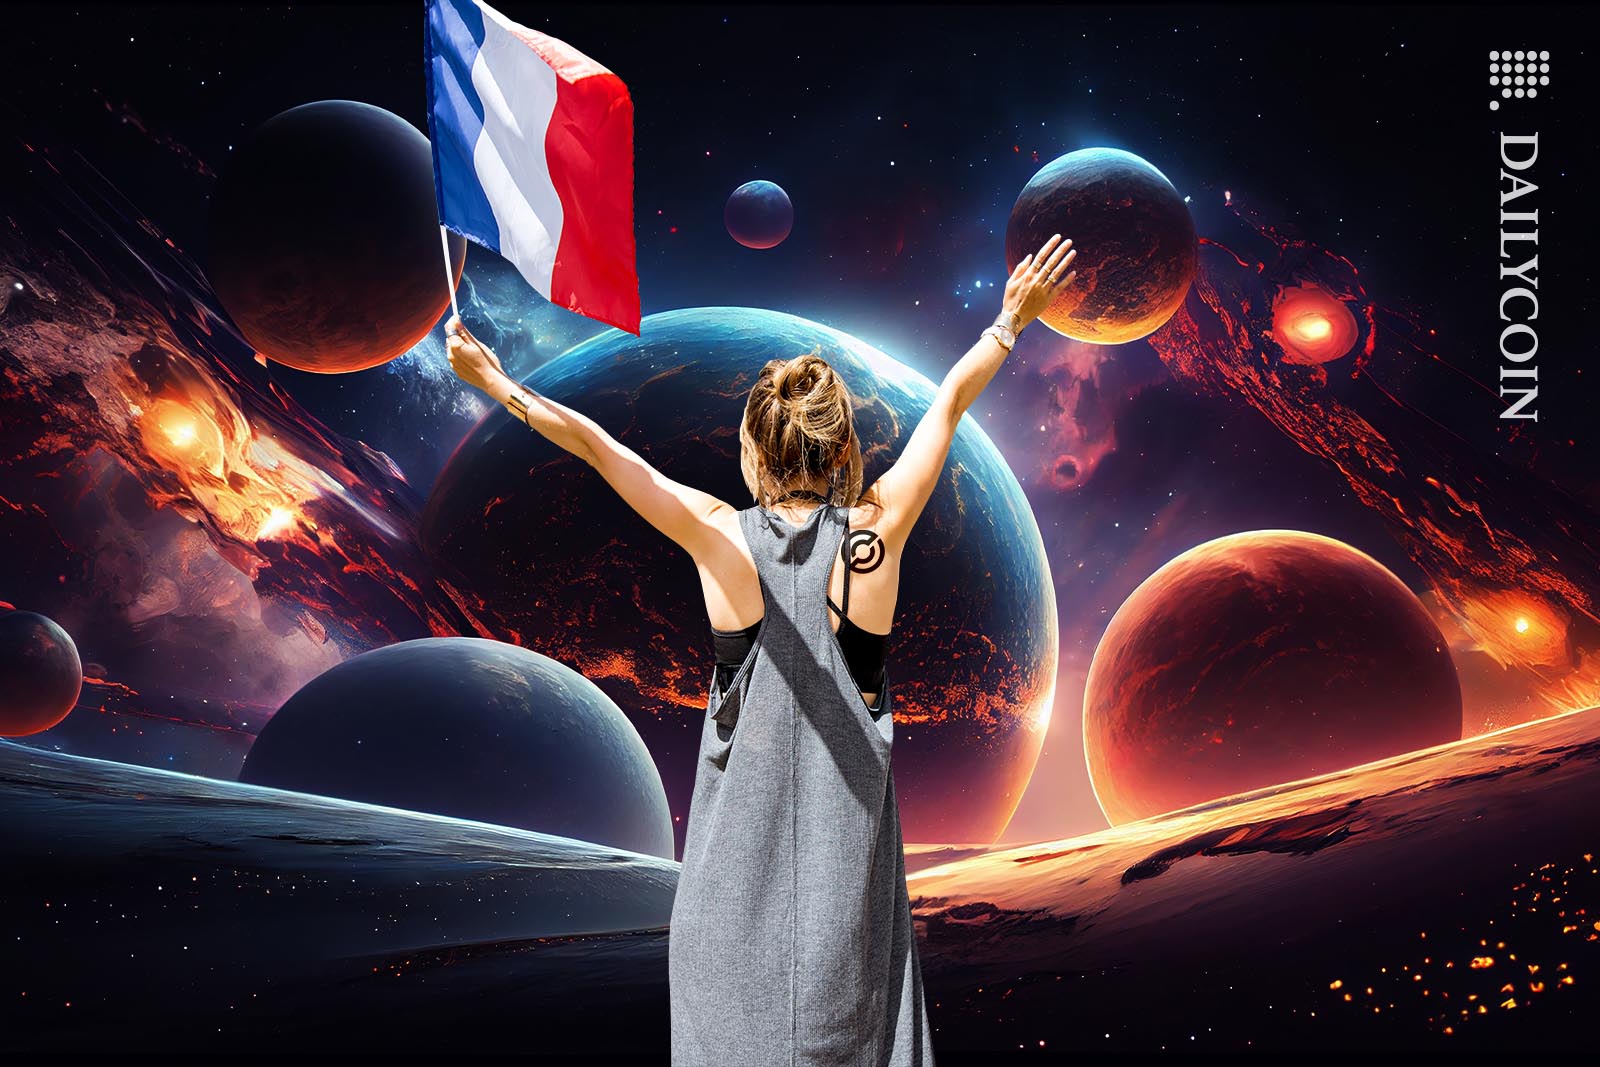 Woman with Circle tattoo waving a French flag towards alien planets in space.